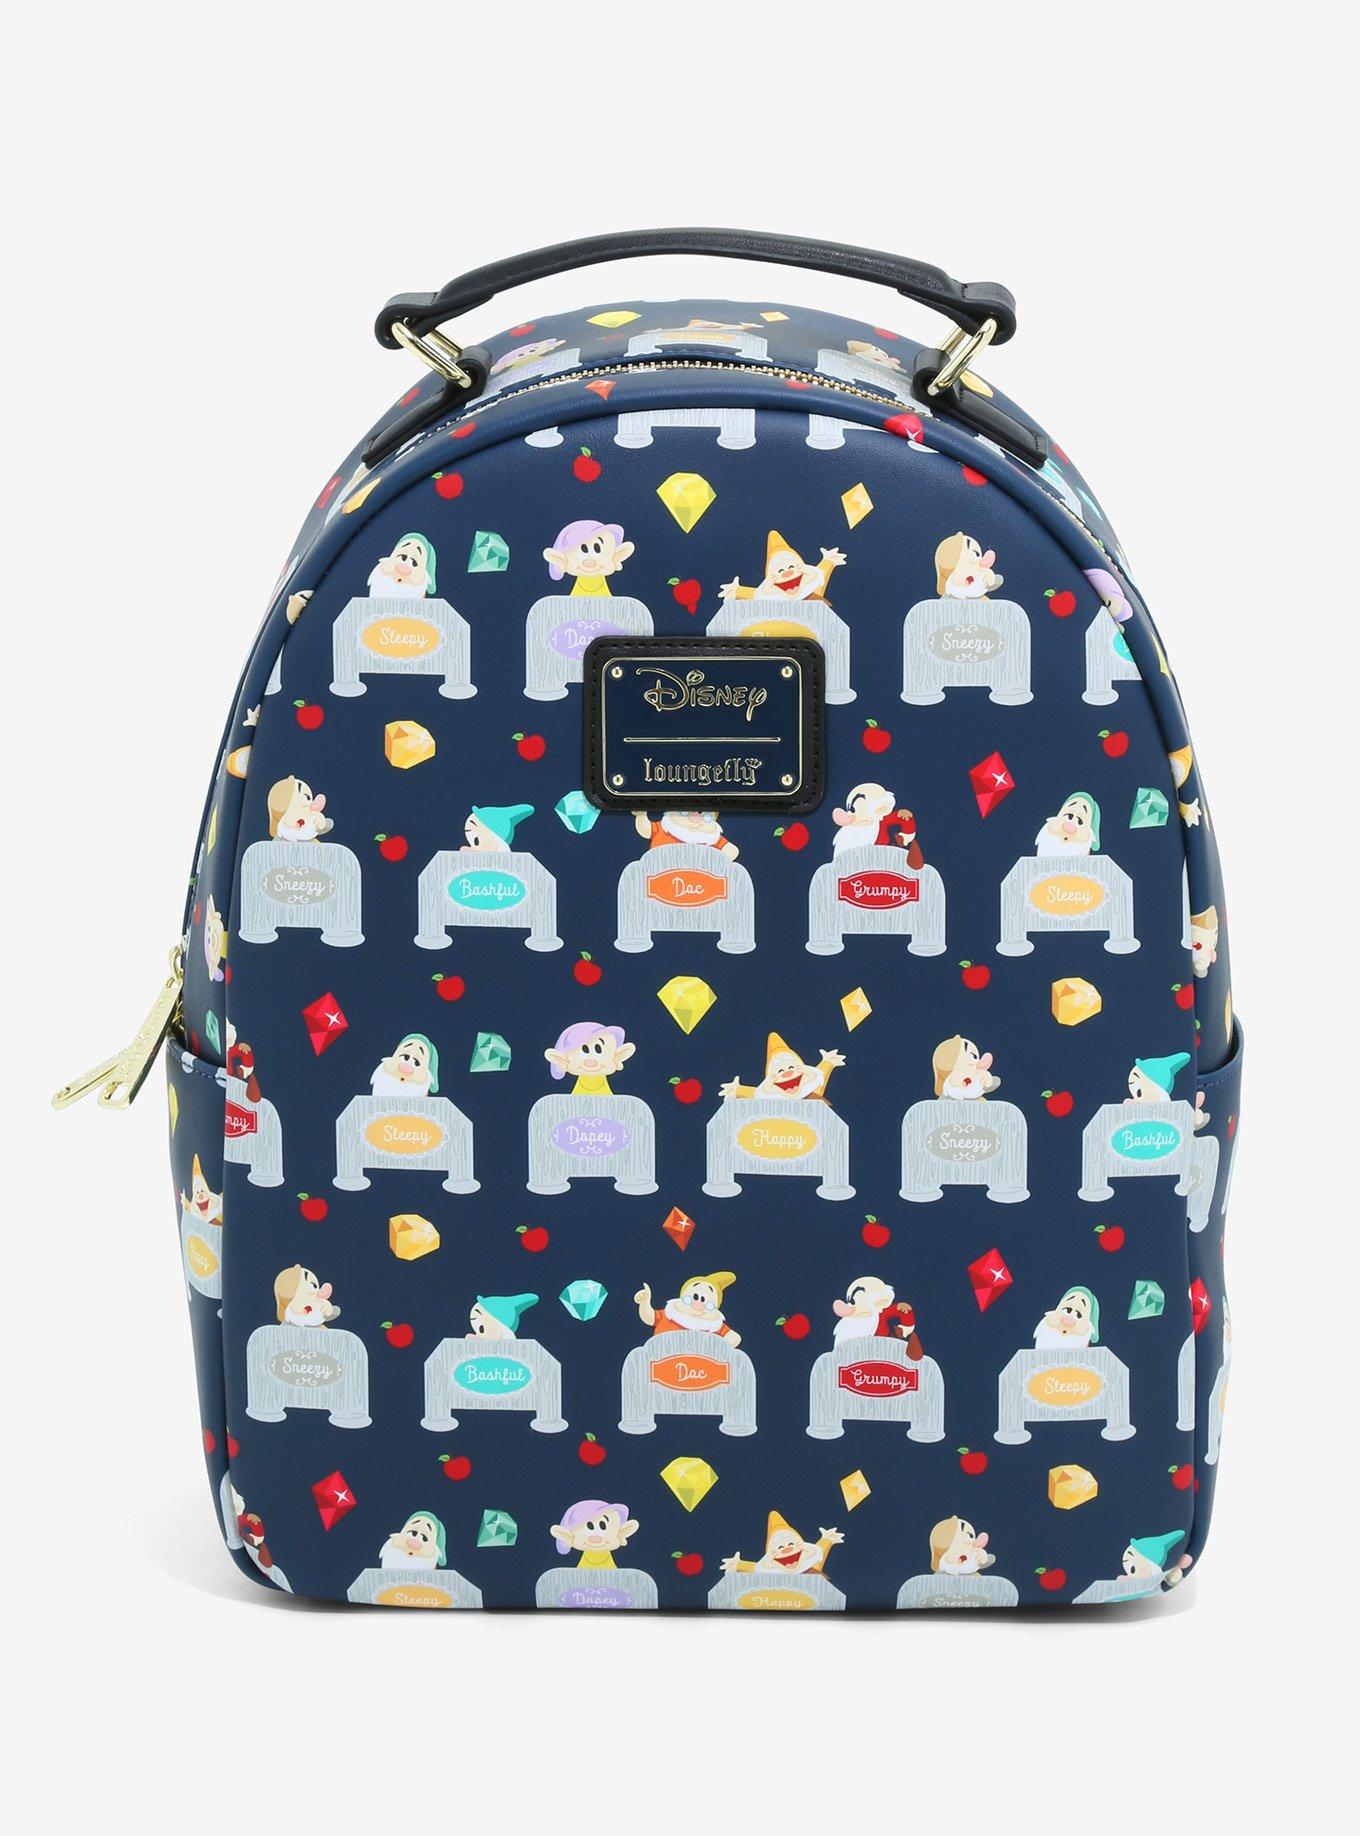 The ULTIMATE Sleeping Beauty Backpack Is For Sale On Boxlunch